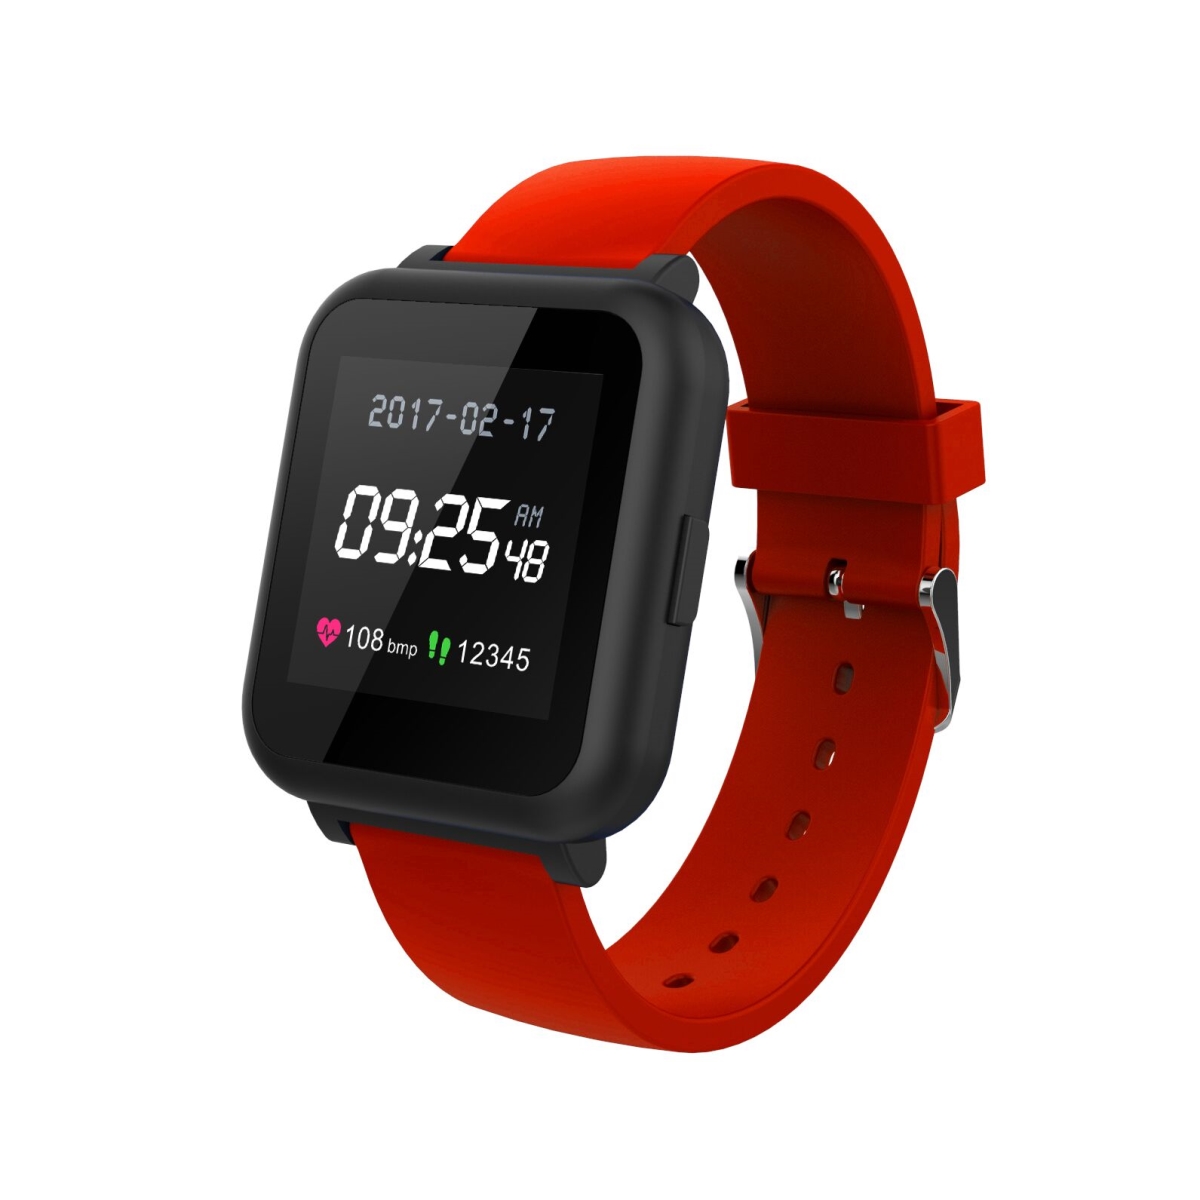 Rbxtr011re Digital Smart Watch With Square Dial & Rubber Strap, Red